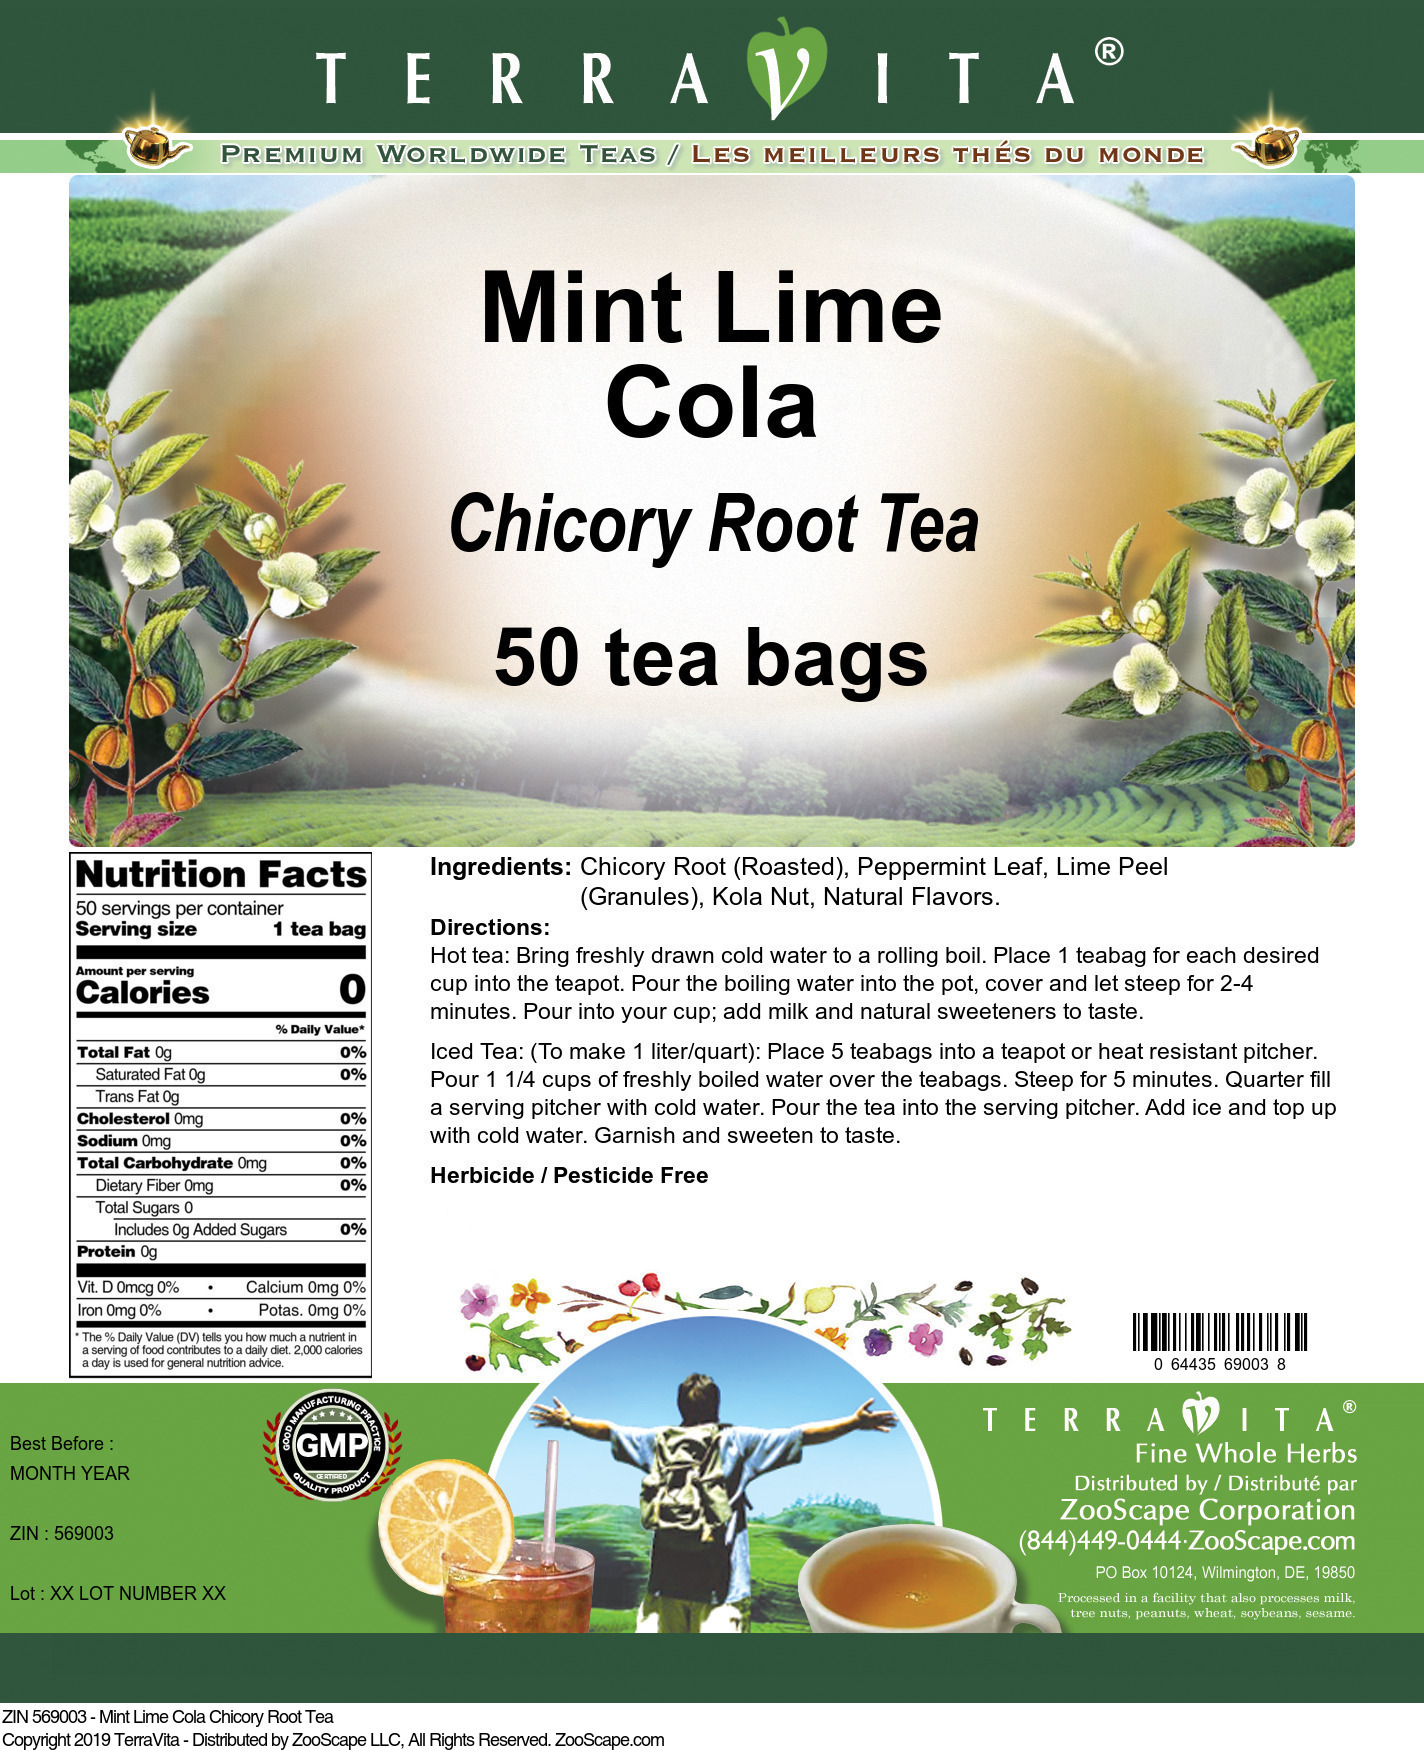 Mint Lime Cola Chicory Root Tea - Label